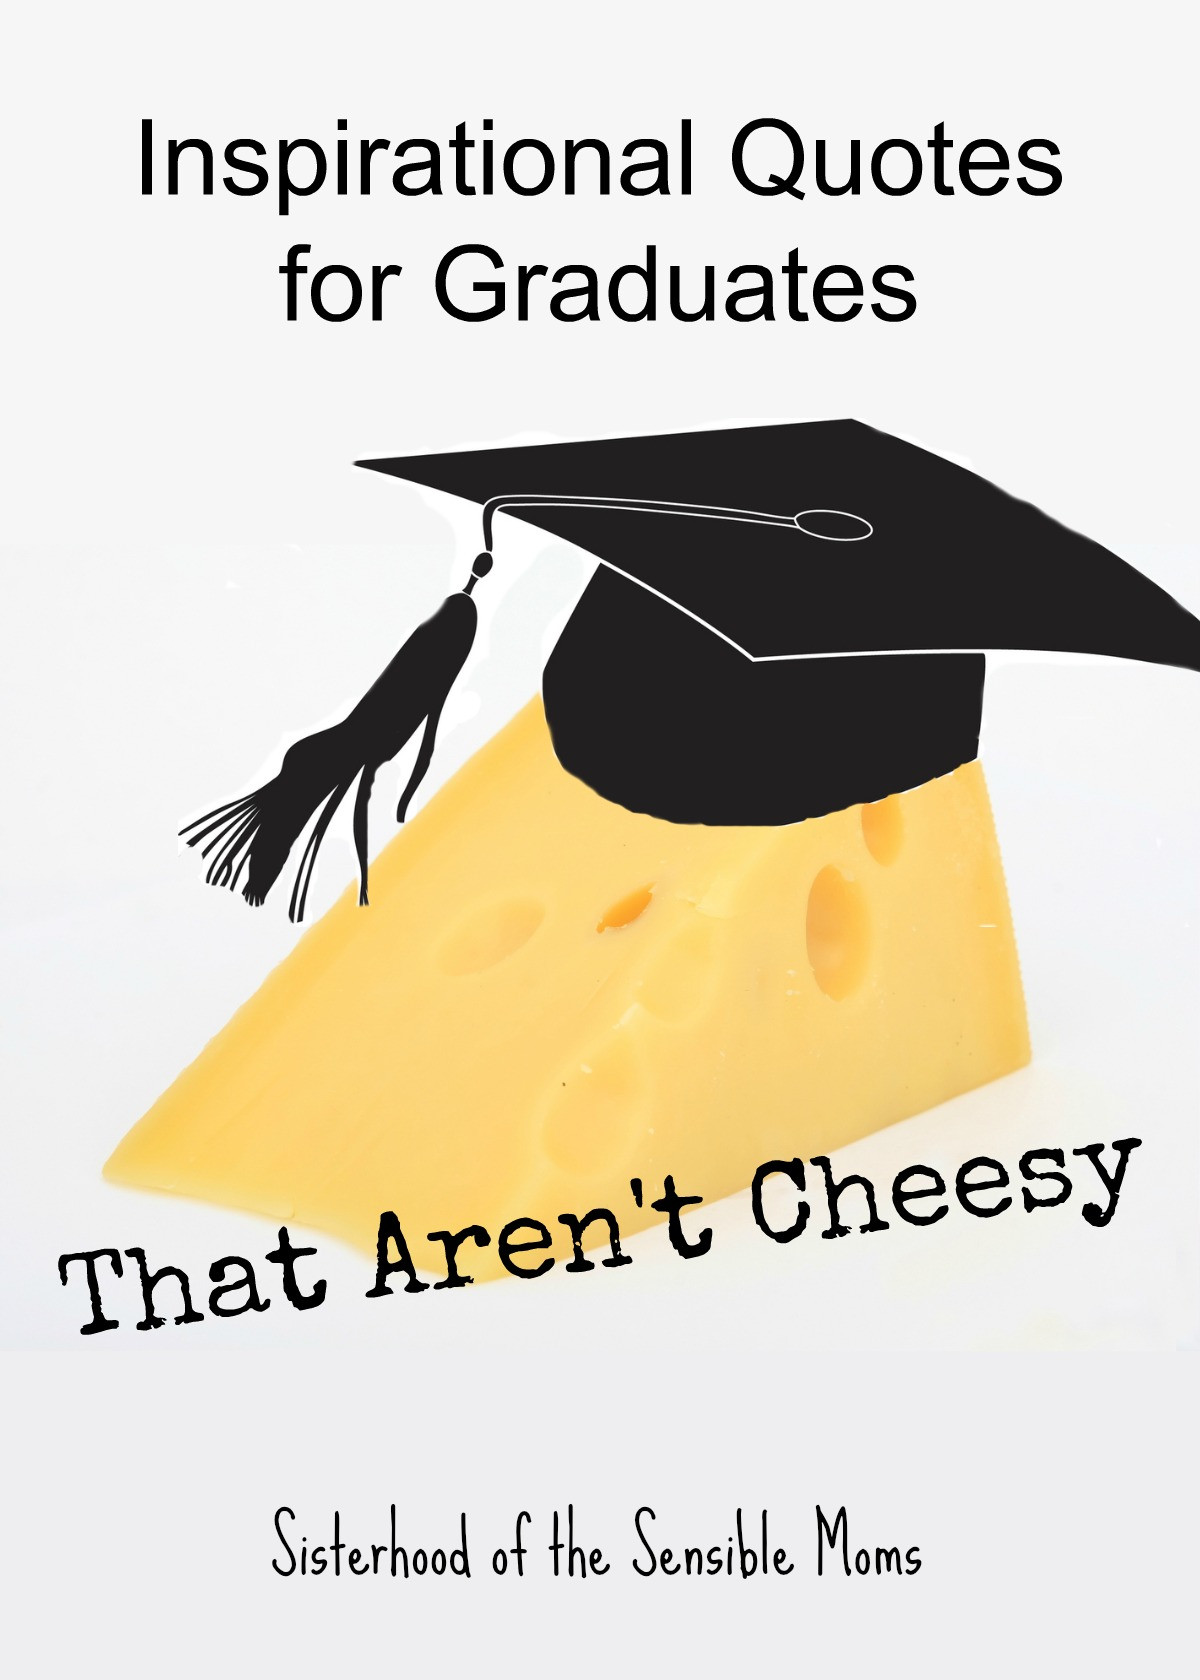 High School Graduation Motivational Quotes
 Inspirational Quotes for Graduates That Aren t Cheesy